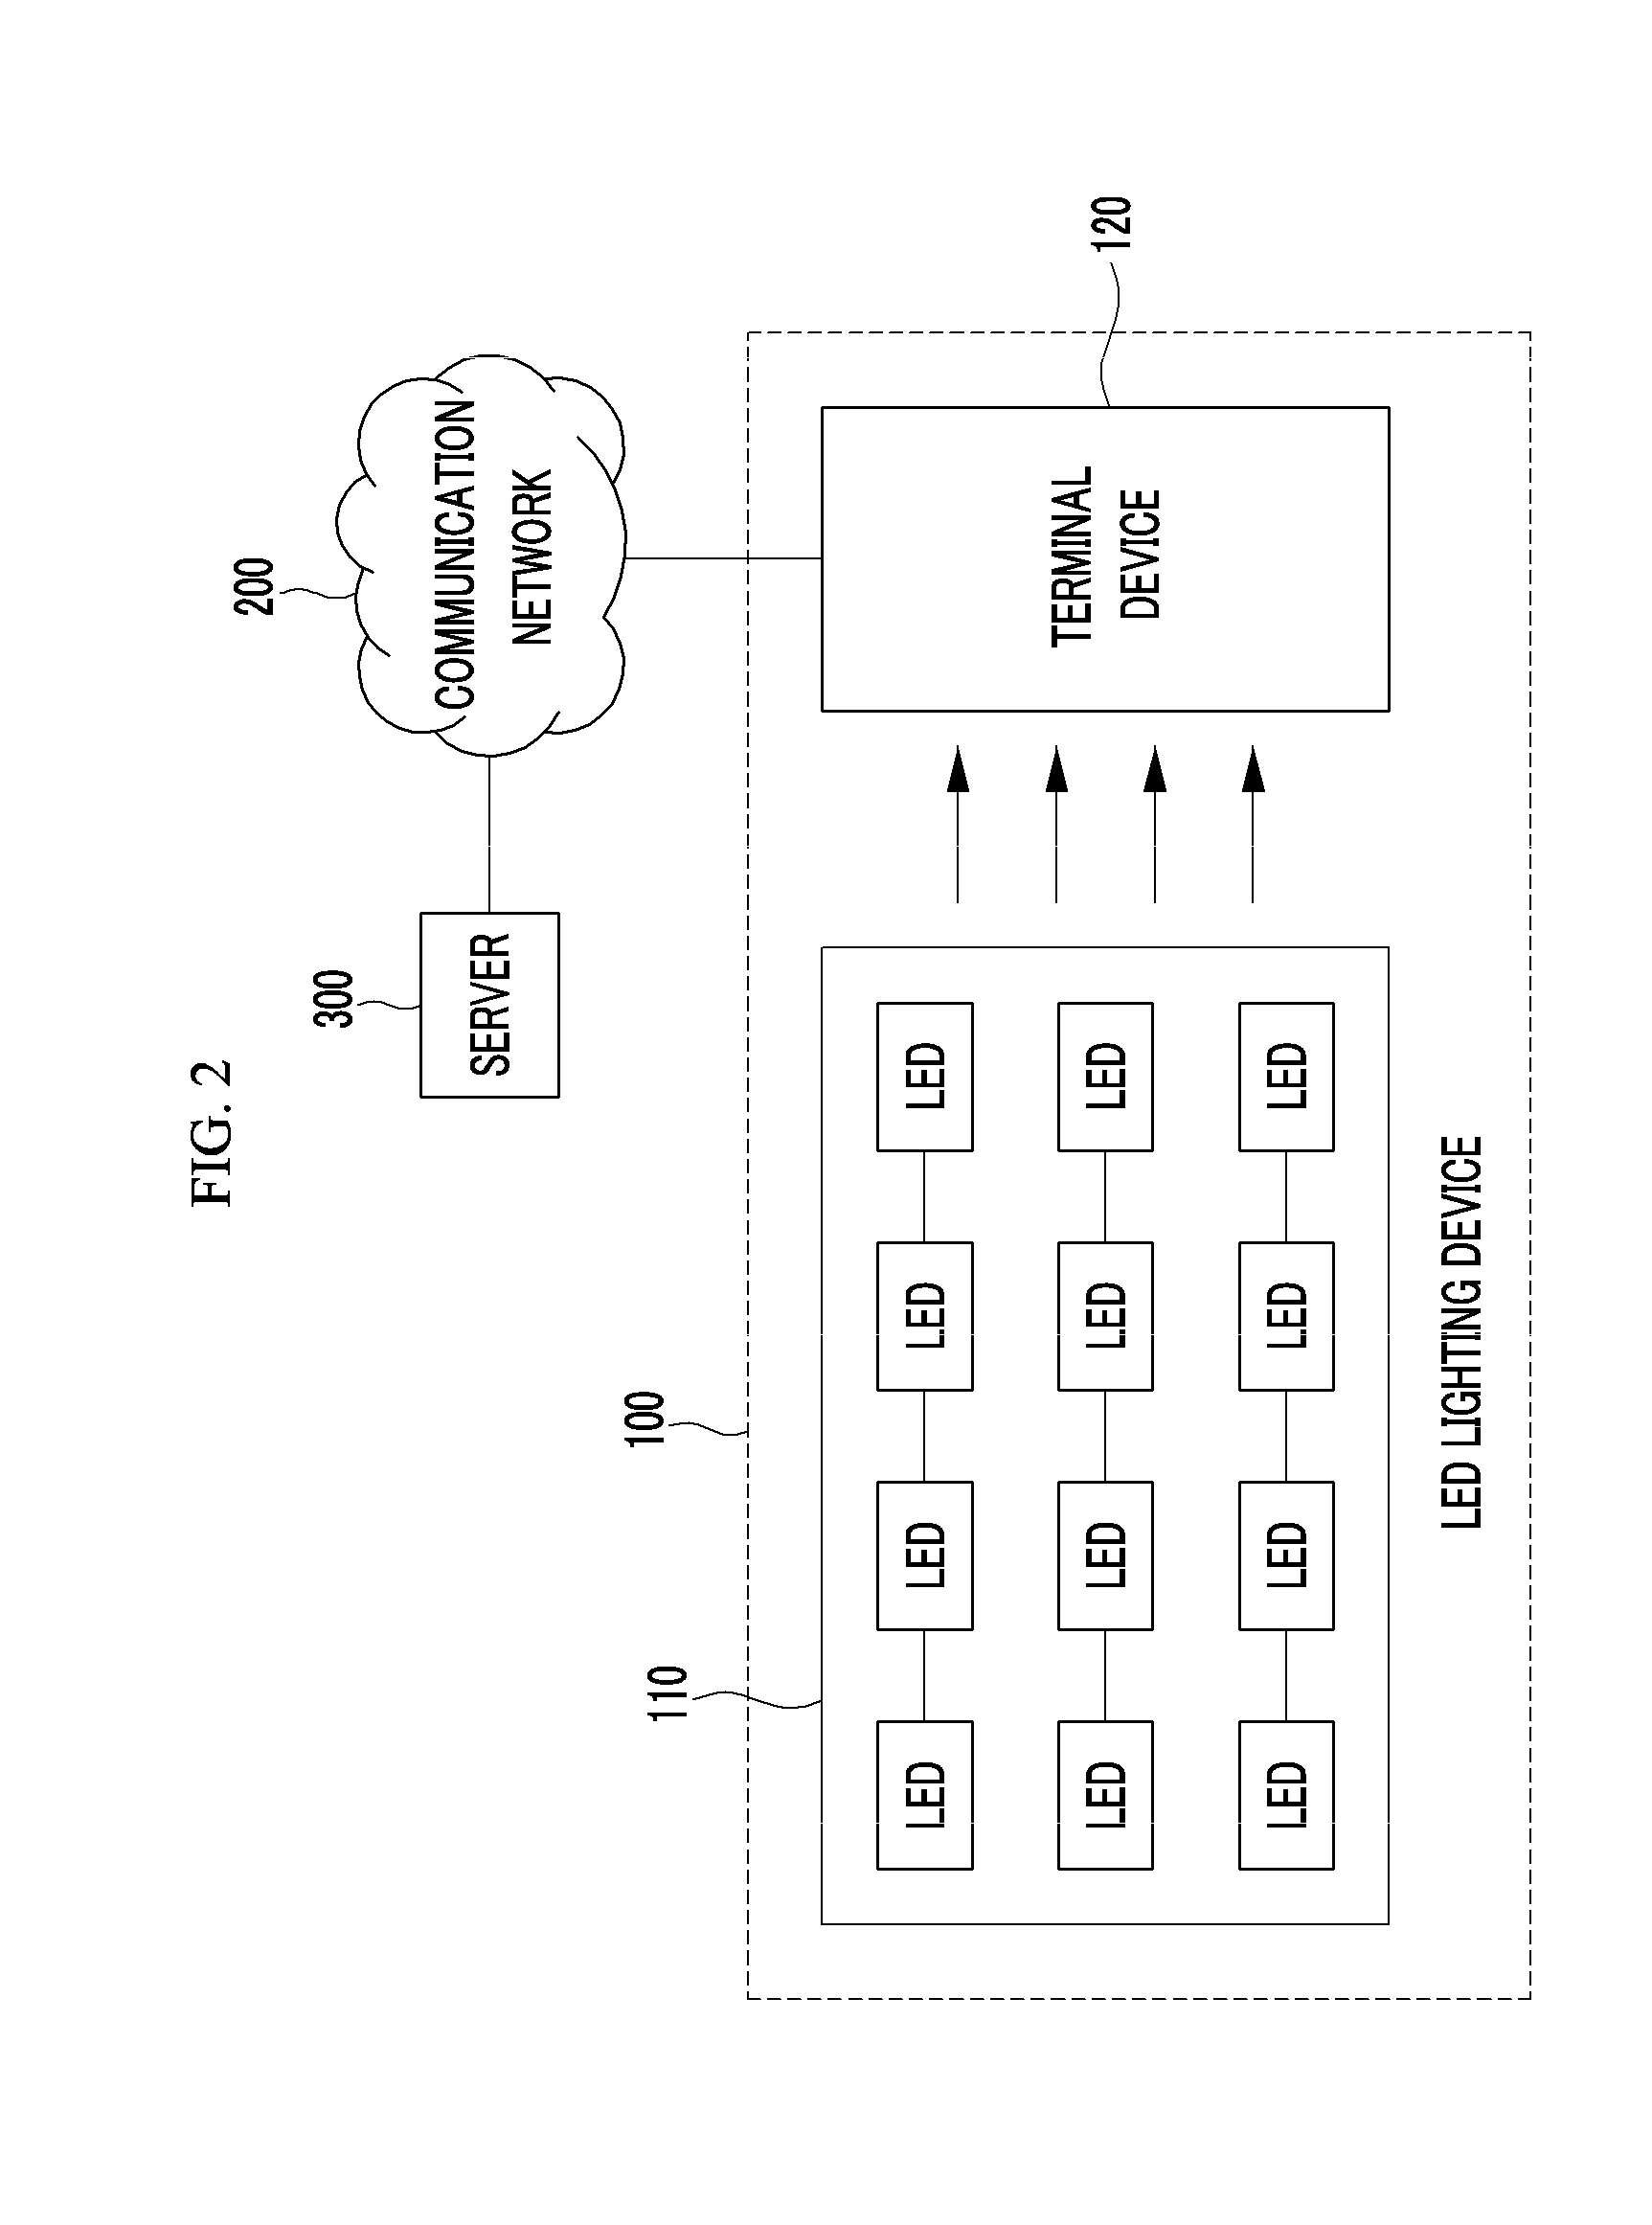 Method and apparatus for transmitting and receiving data using visible light communication